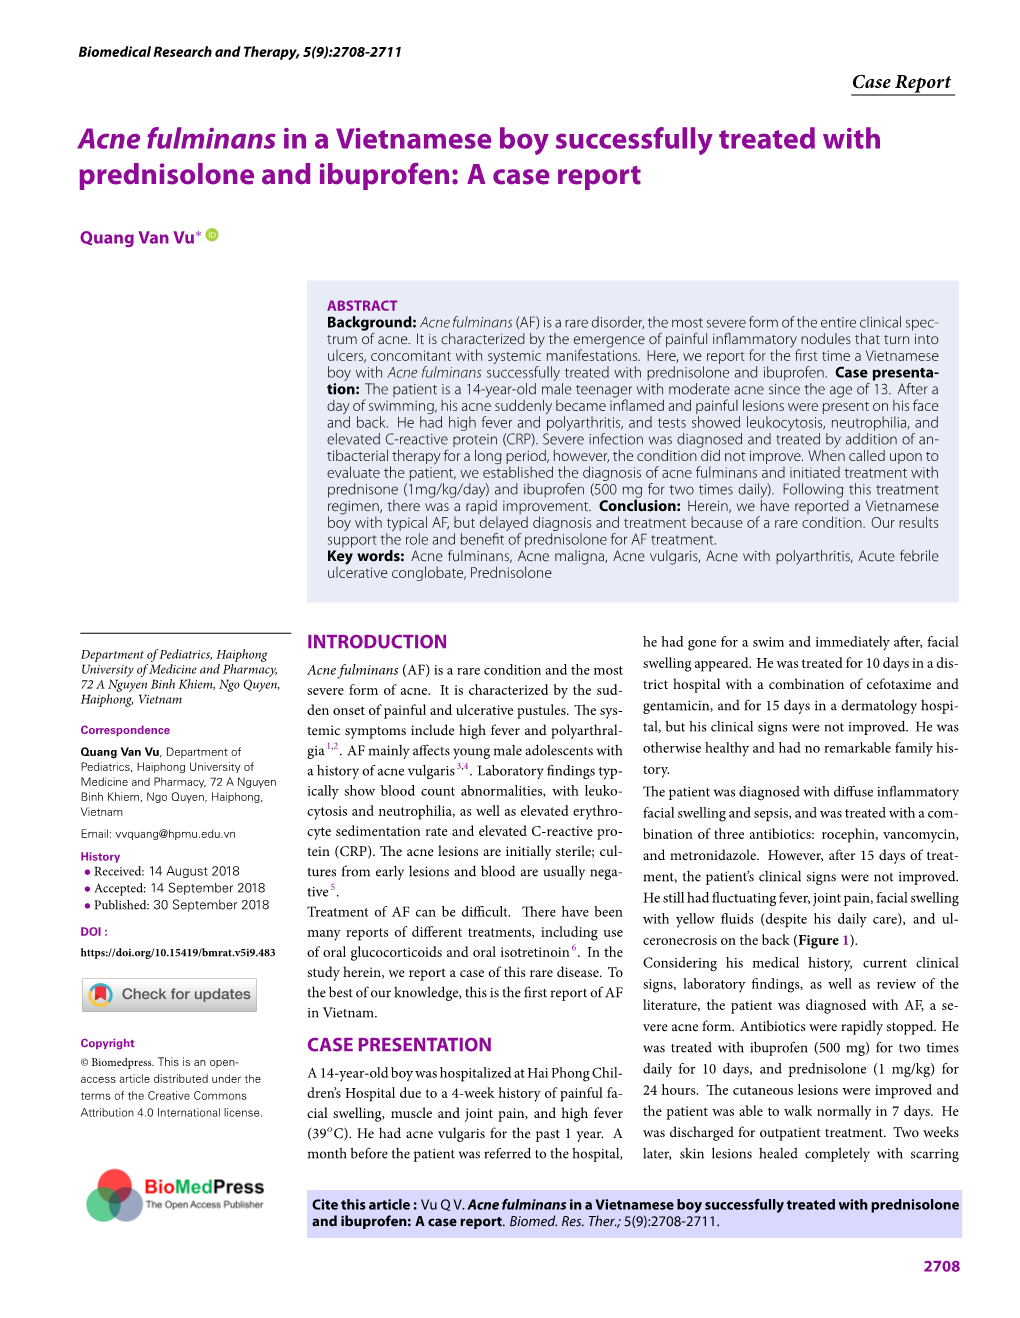 Acne Fulminans in a Vietnamese Boy Successfully Treated with Prednisolone and Ibuprofen: a Case Report